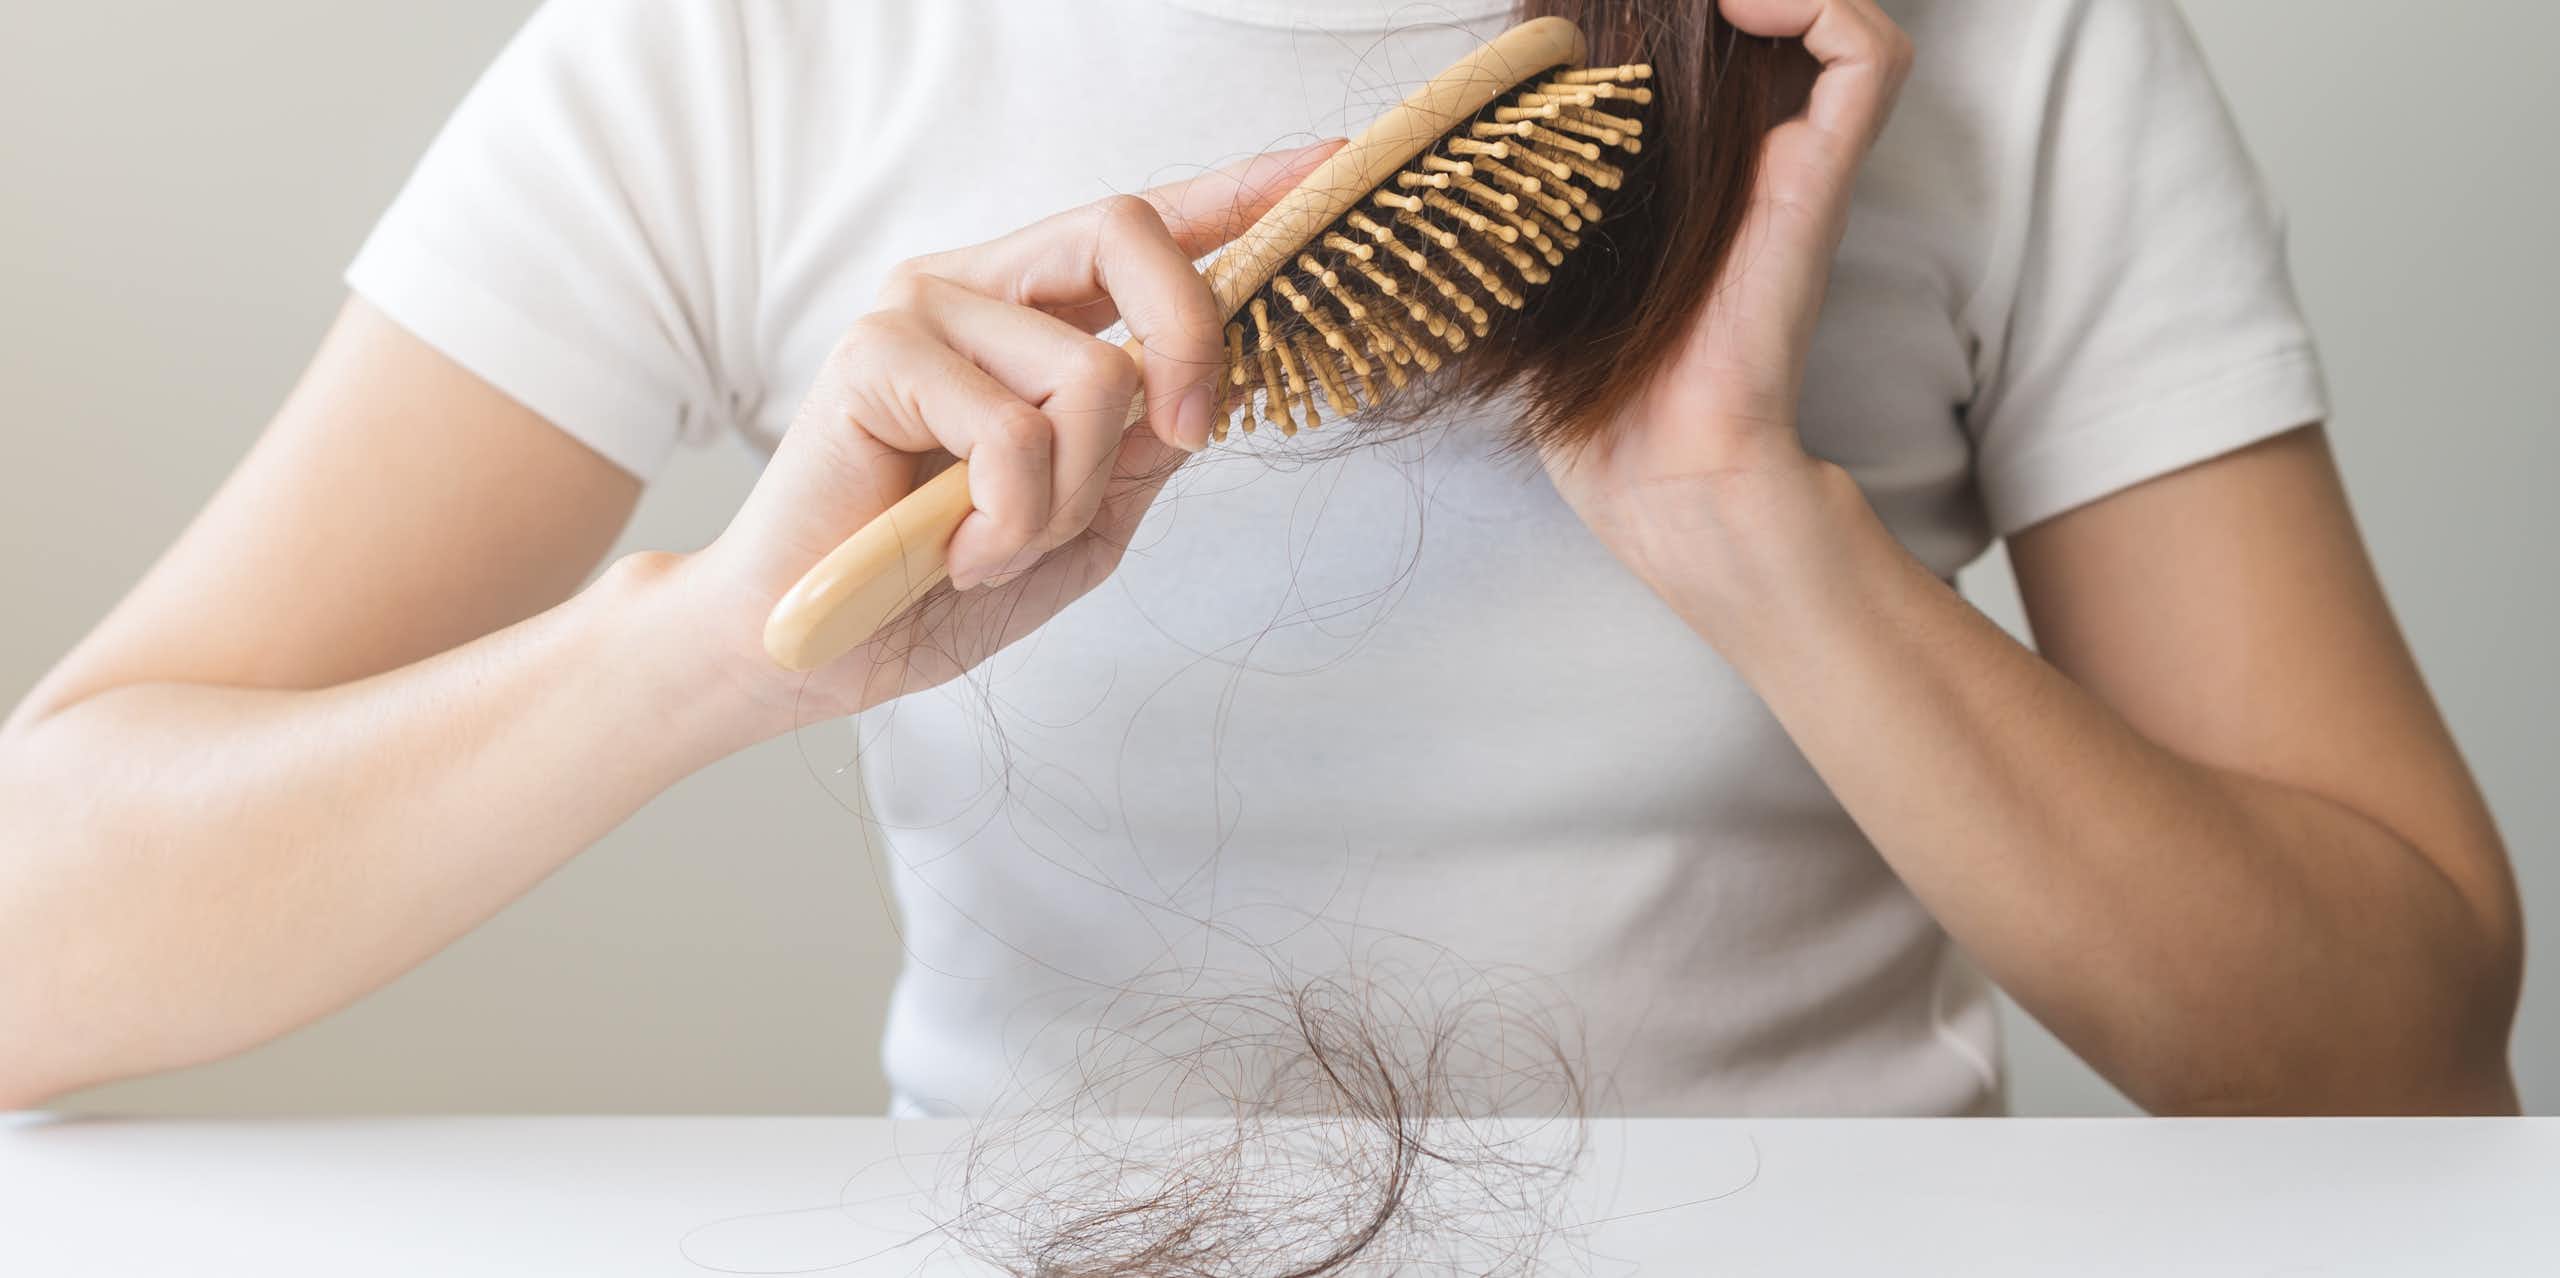 A woman brushes her hair using a wooden hair brush. There's a clump of hair on the table in front of her.